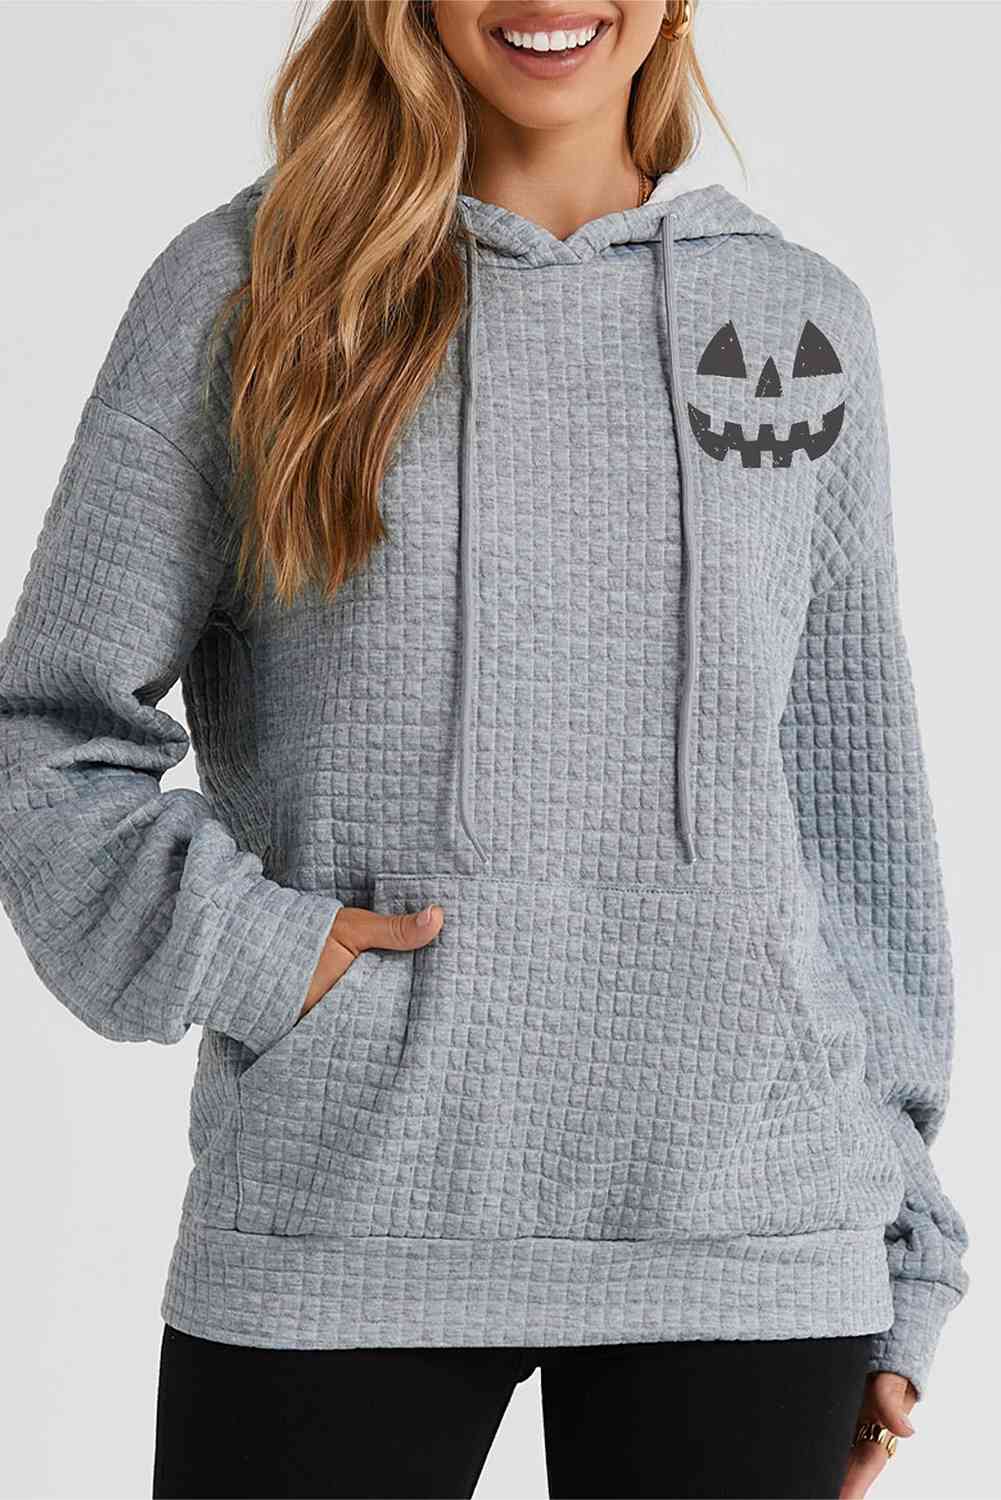 Women's Pumpkin Face Graphic Drawstring Hoodie with Pocket